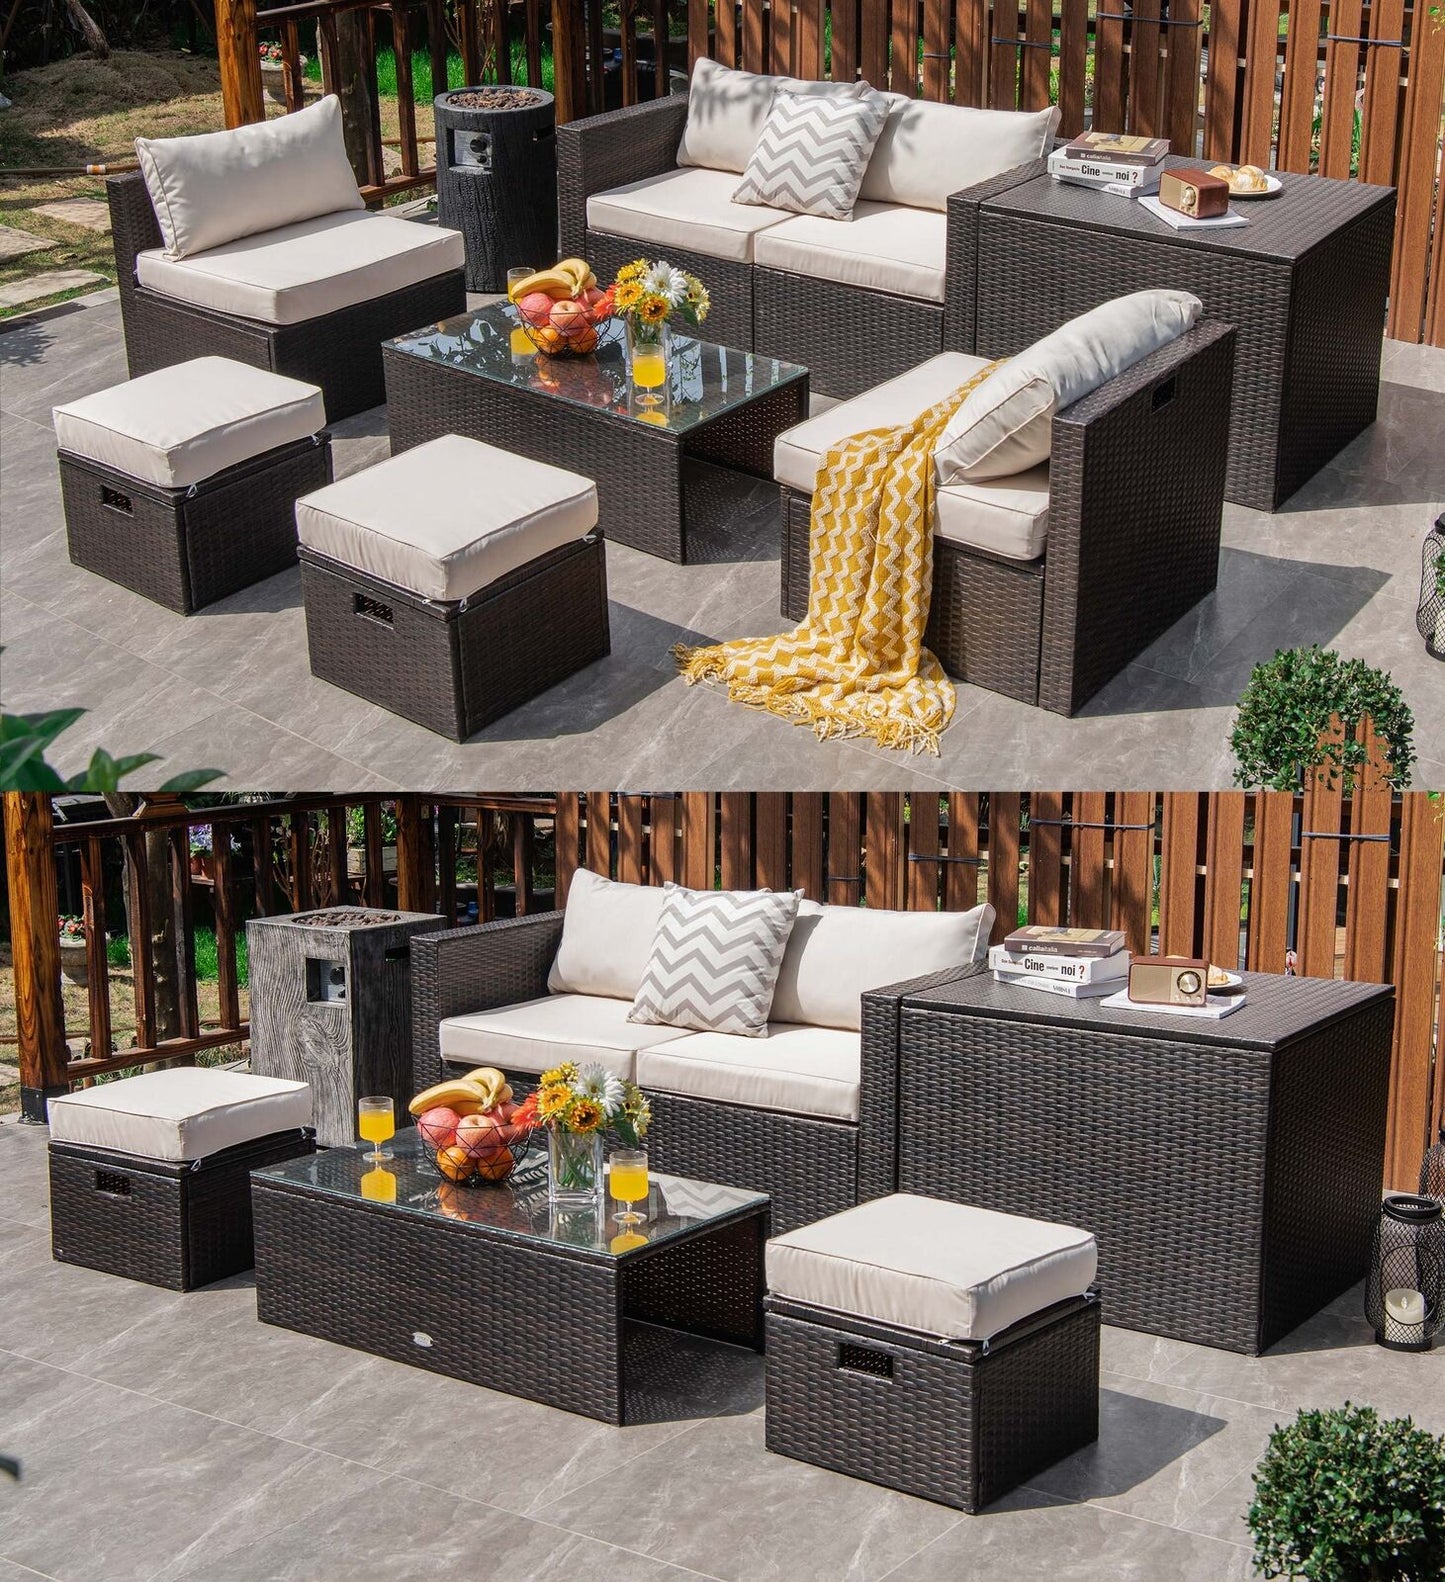 8 Pieces Patio Space-Saving Rattan Furniture Set with Storage Box and Waterproof Cover-White